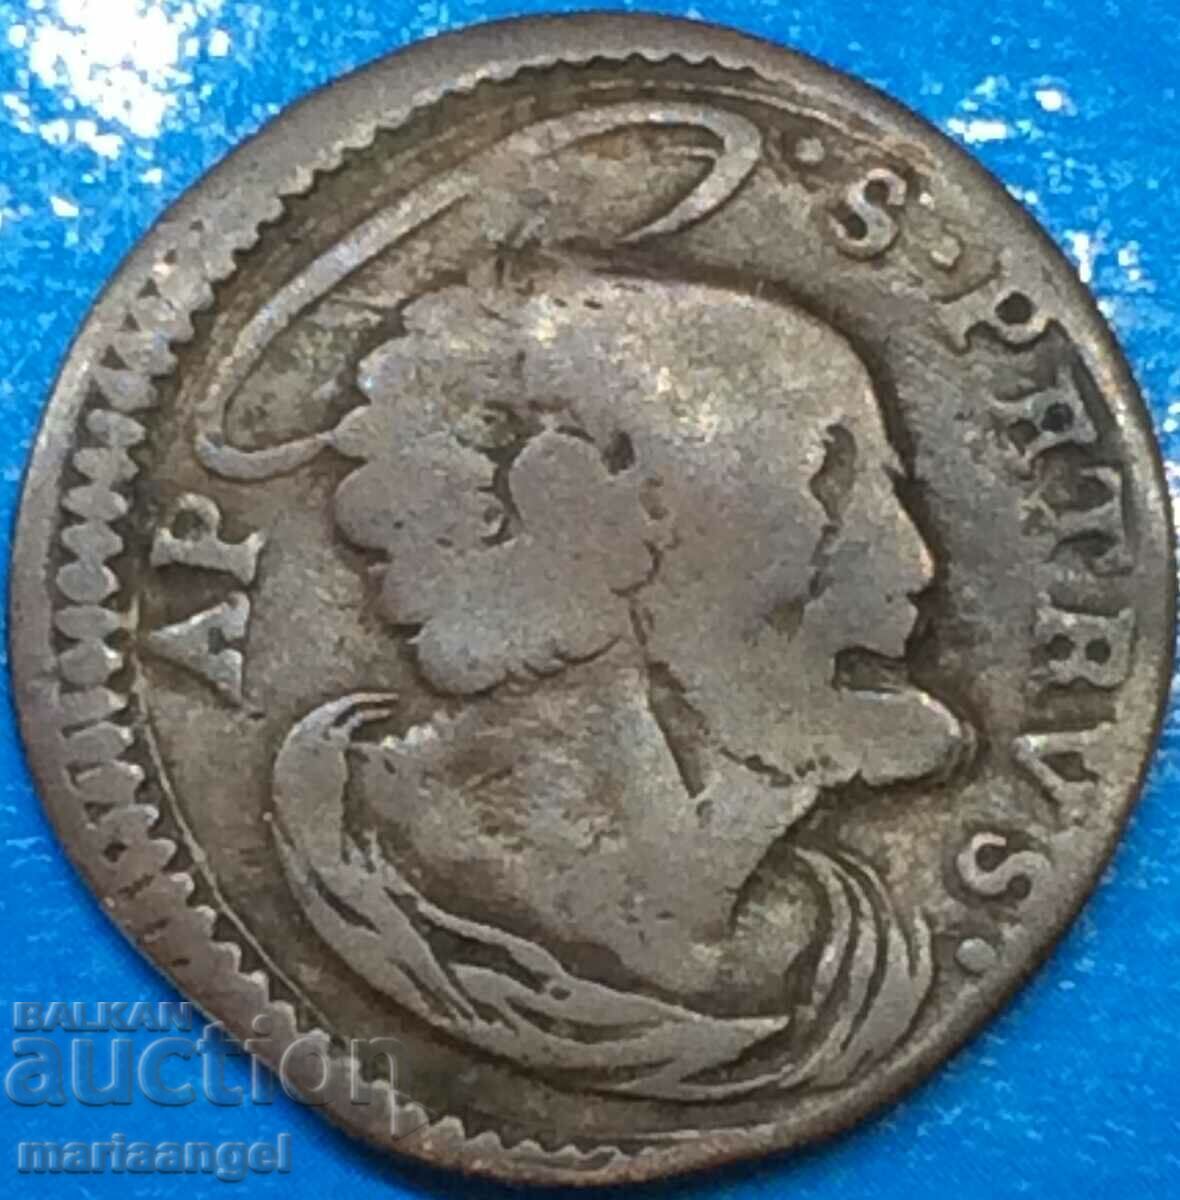 Quattino Vatican Clement XII 1730-1740 St. Peter 2.3 years copper